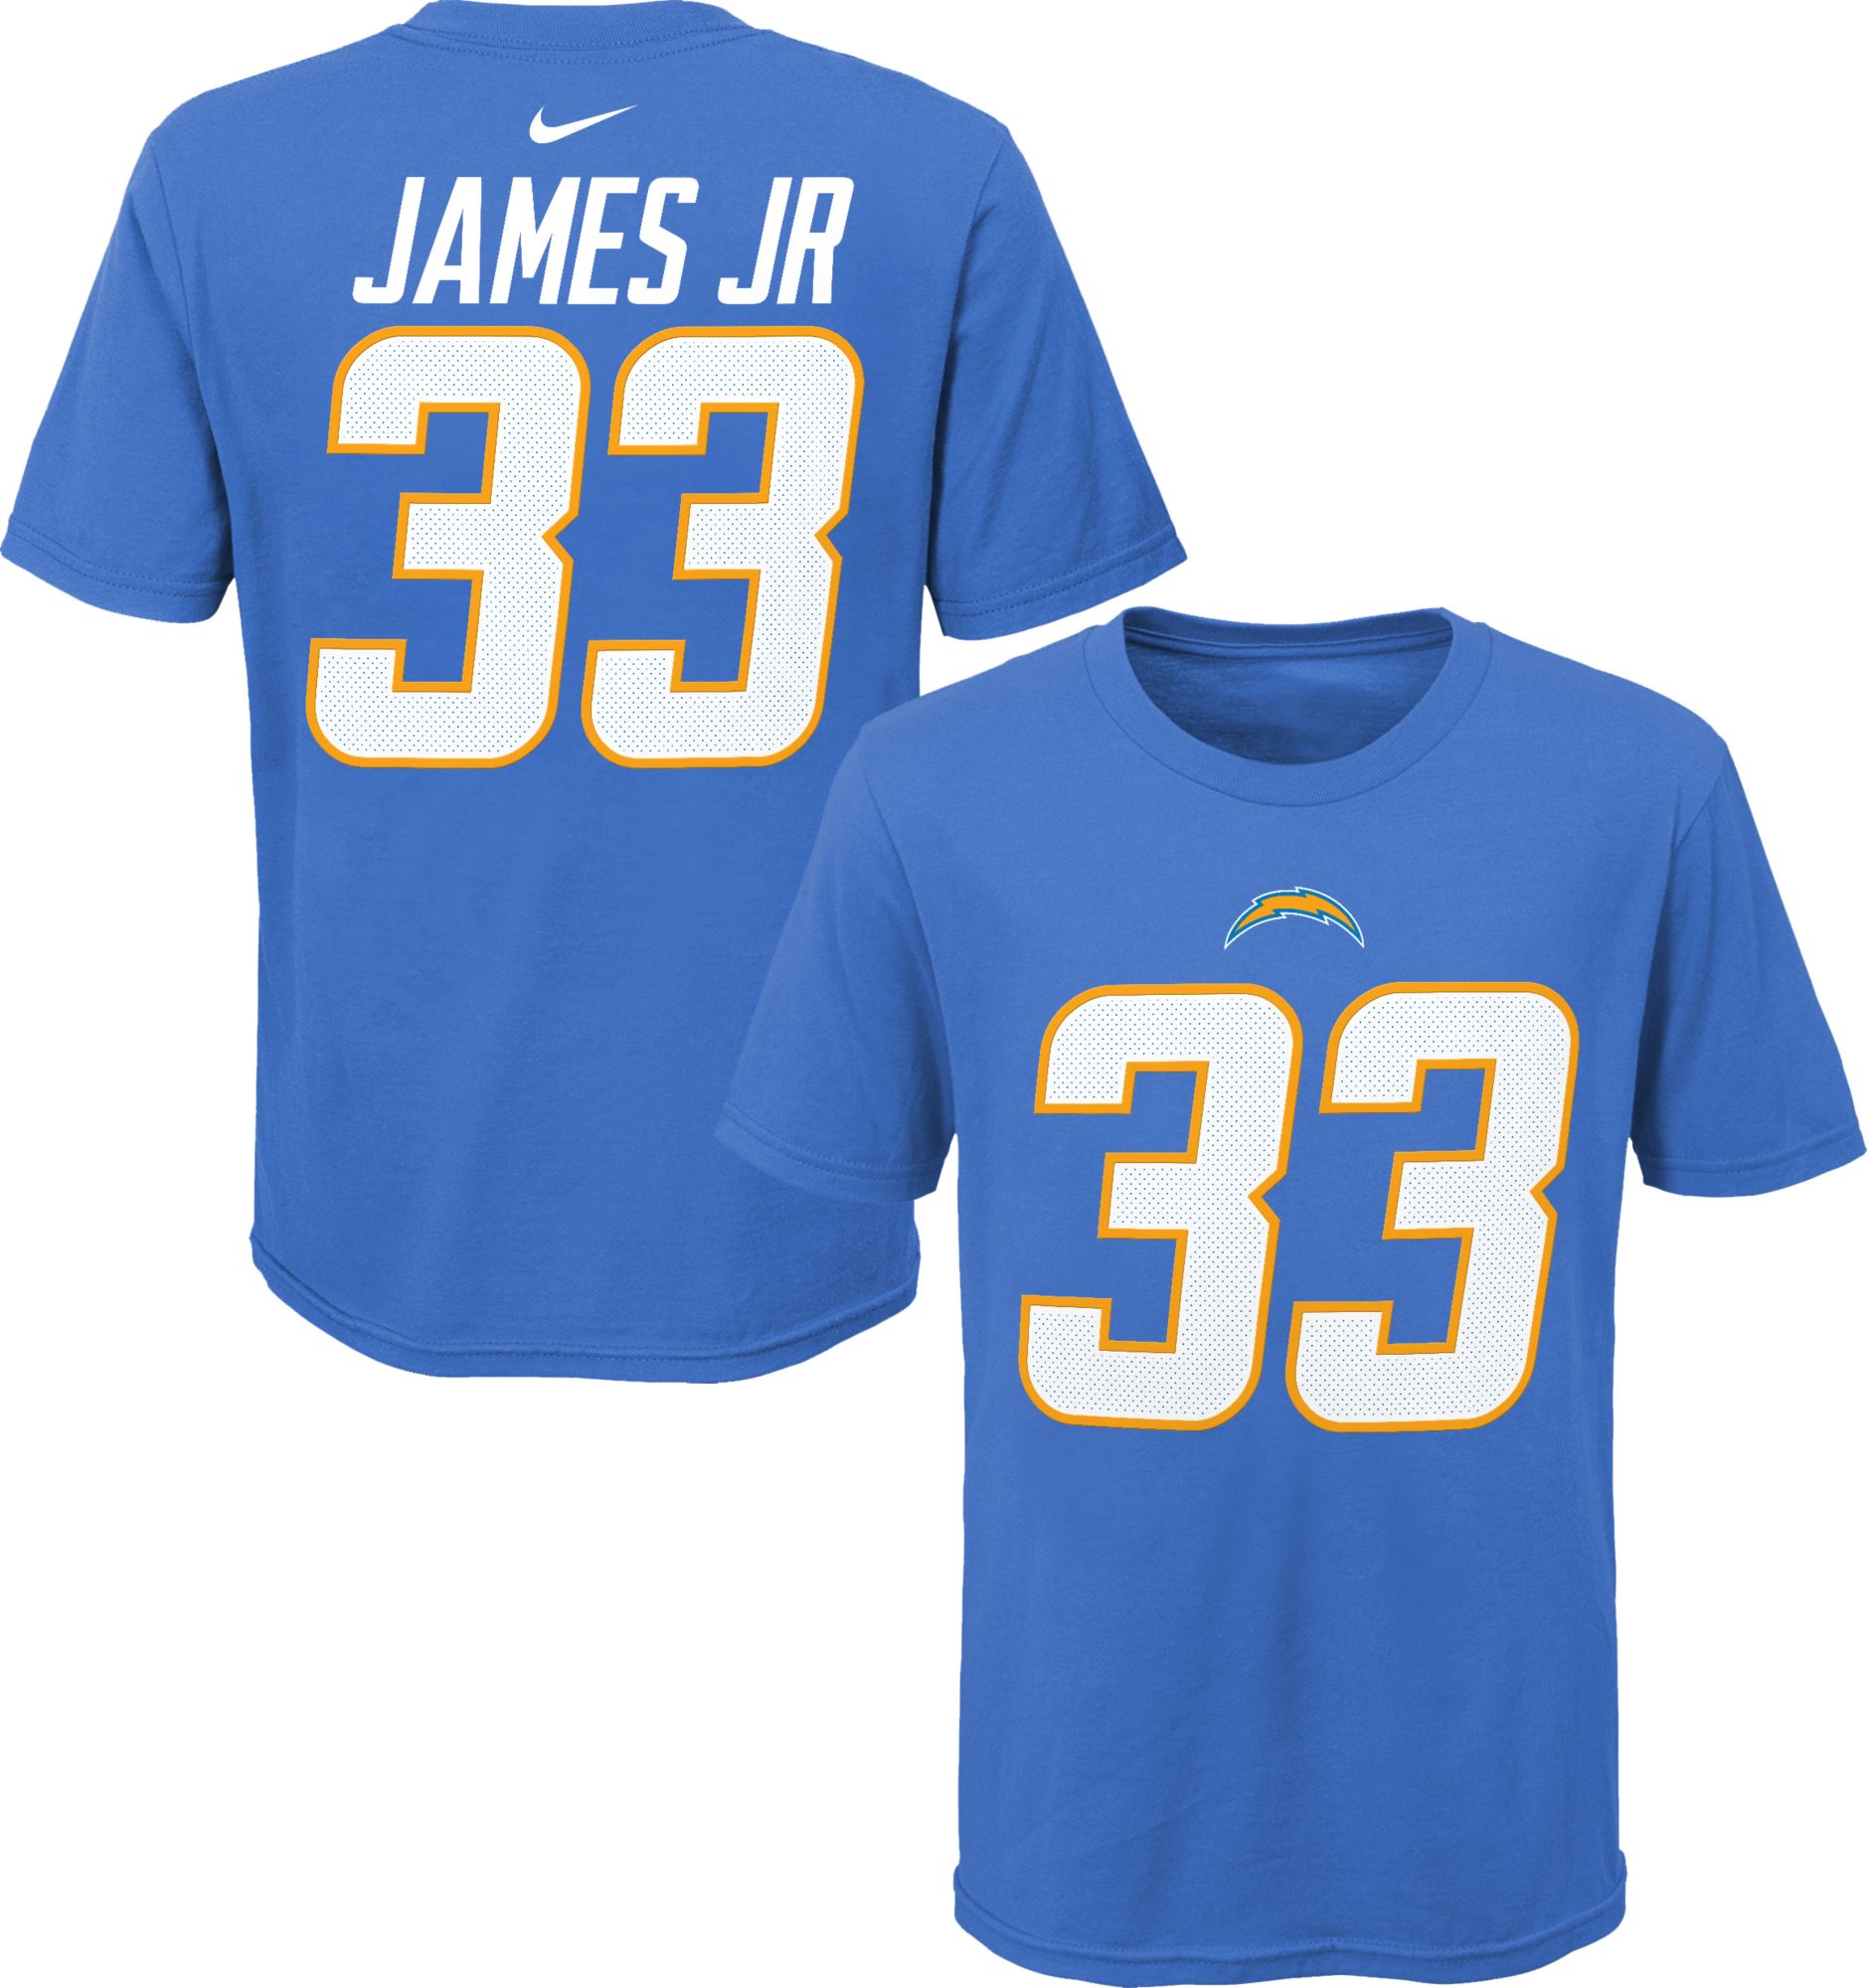 Los Angeles Chargers T-Shirts in Los Angeles Chargers Team Shop